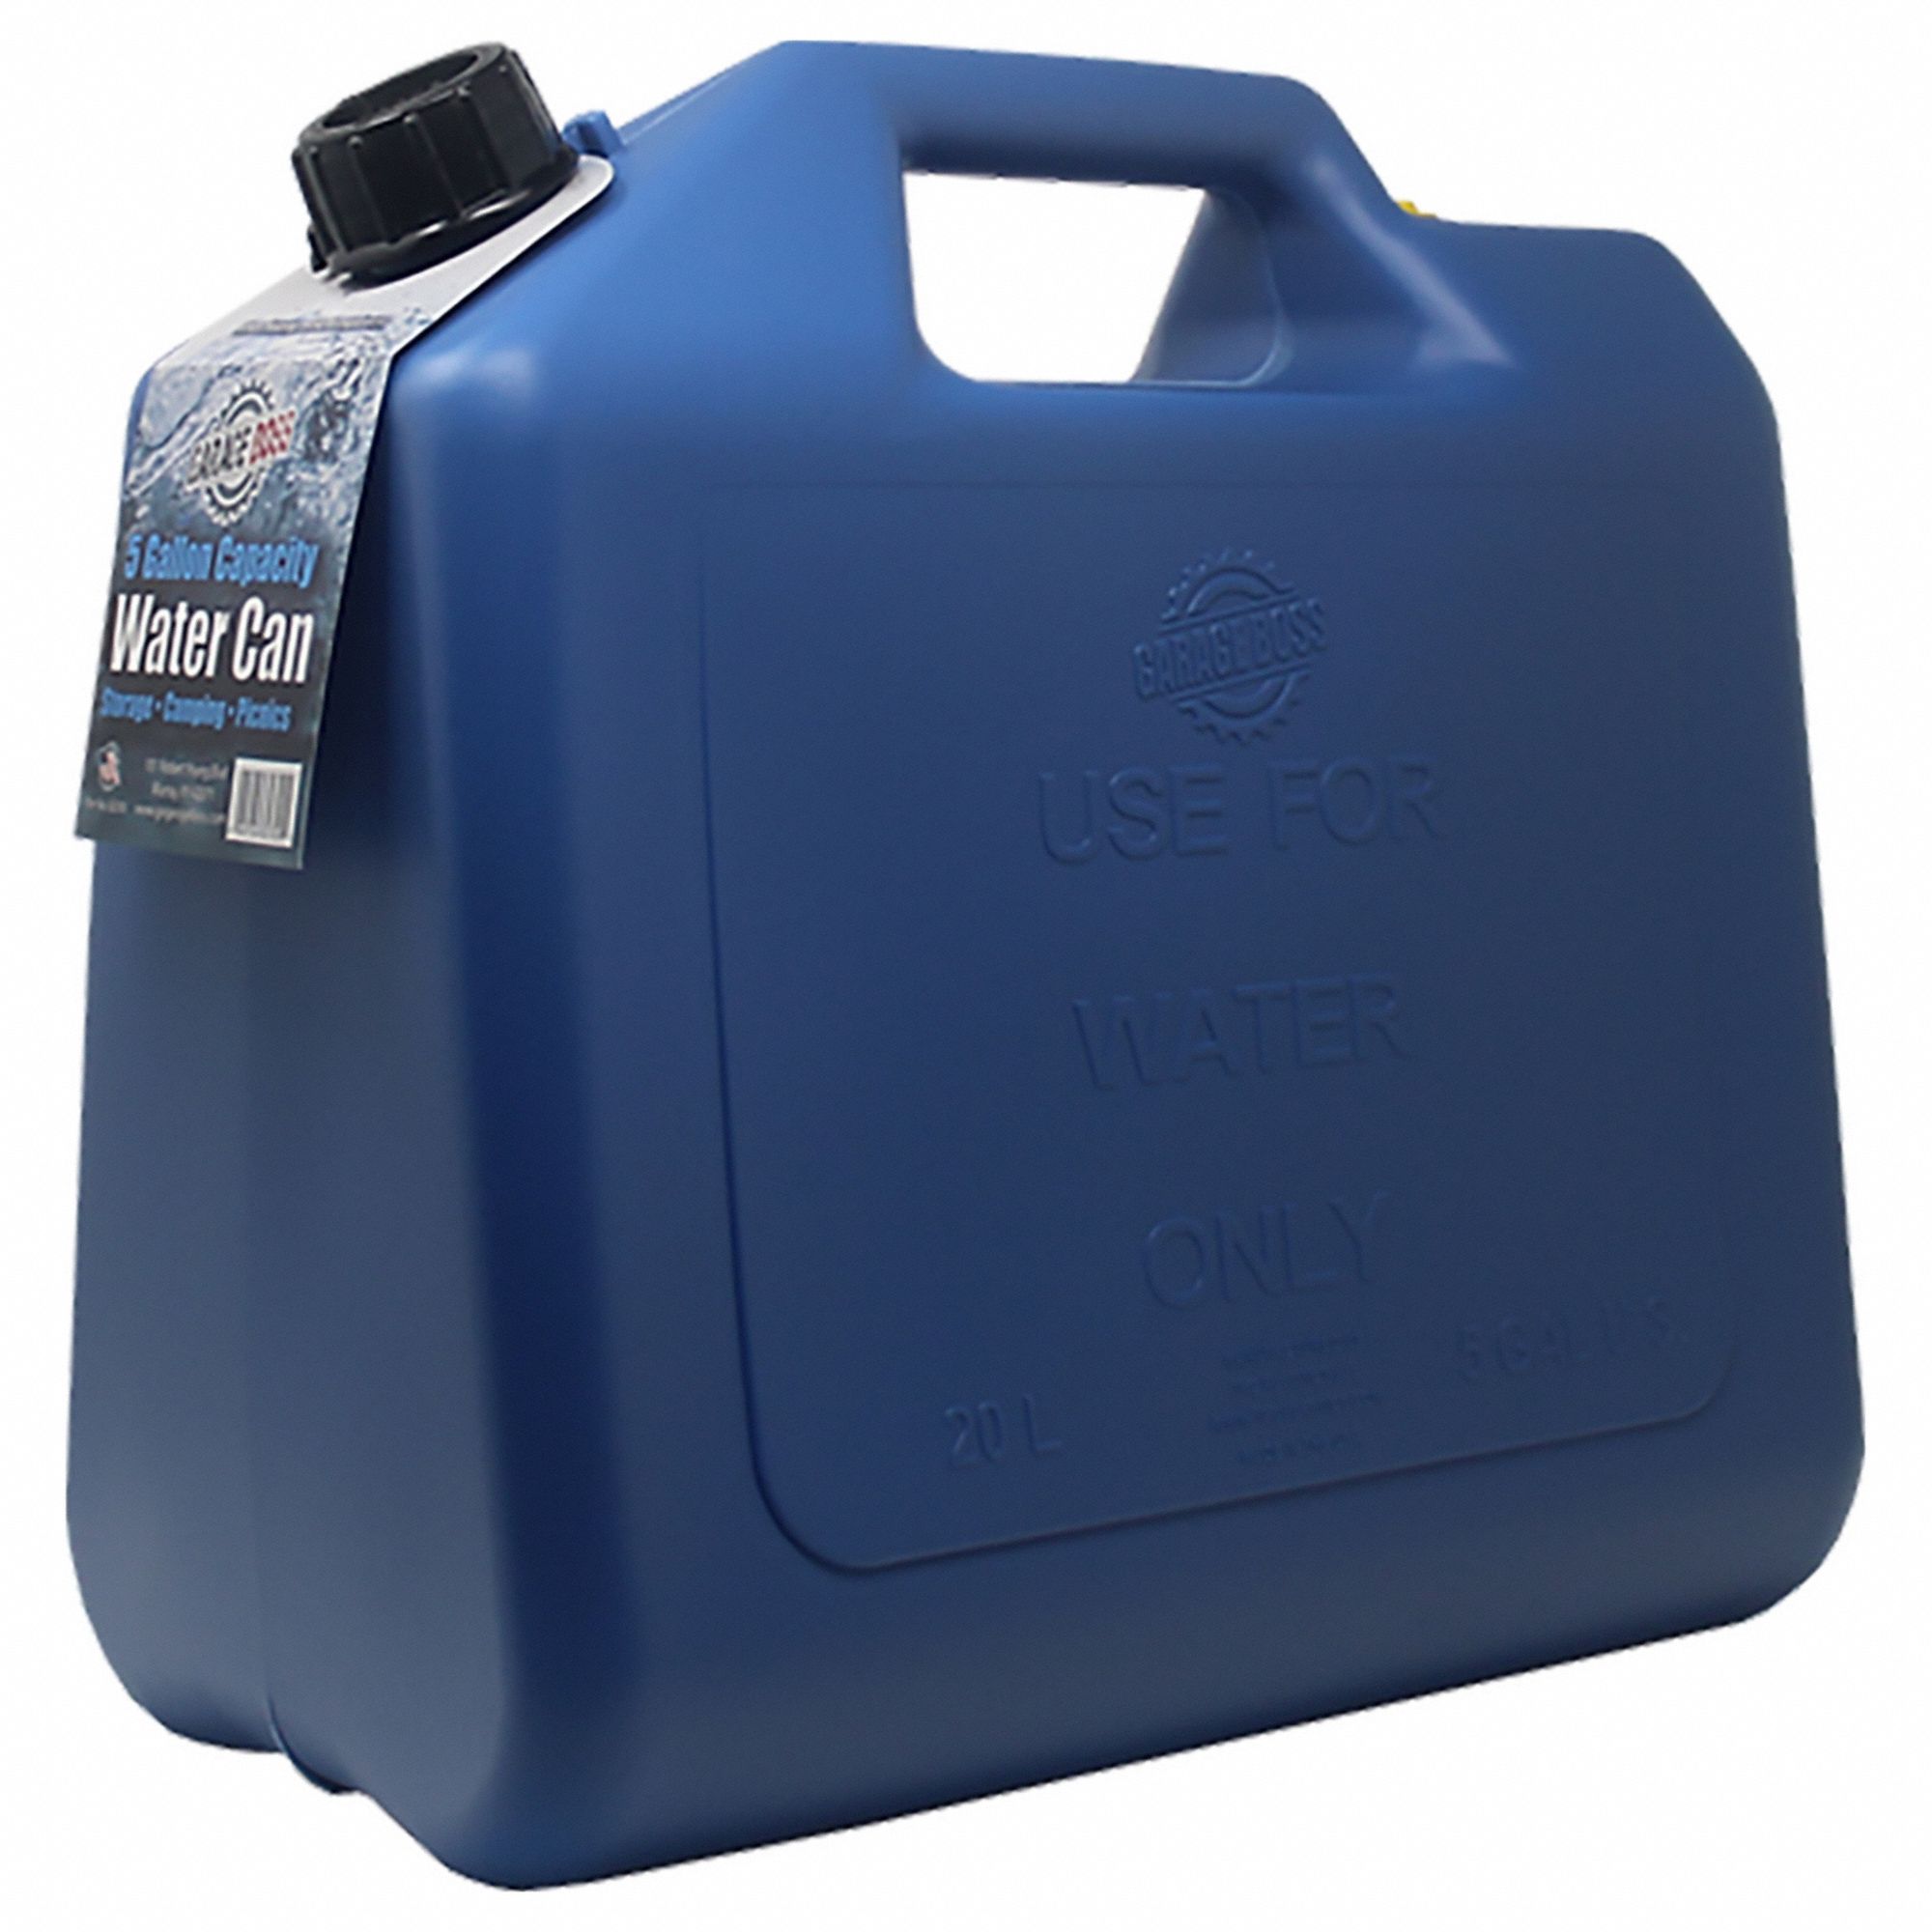 Water Container: 5 gal Capacity, 14 3/4 in Ht, 15 1/2 in Lg, 11 in Wd, Blue